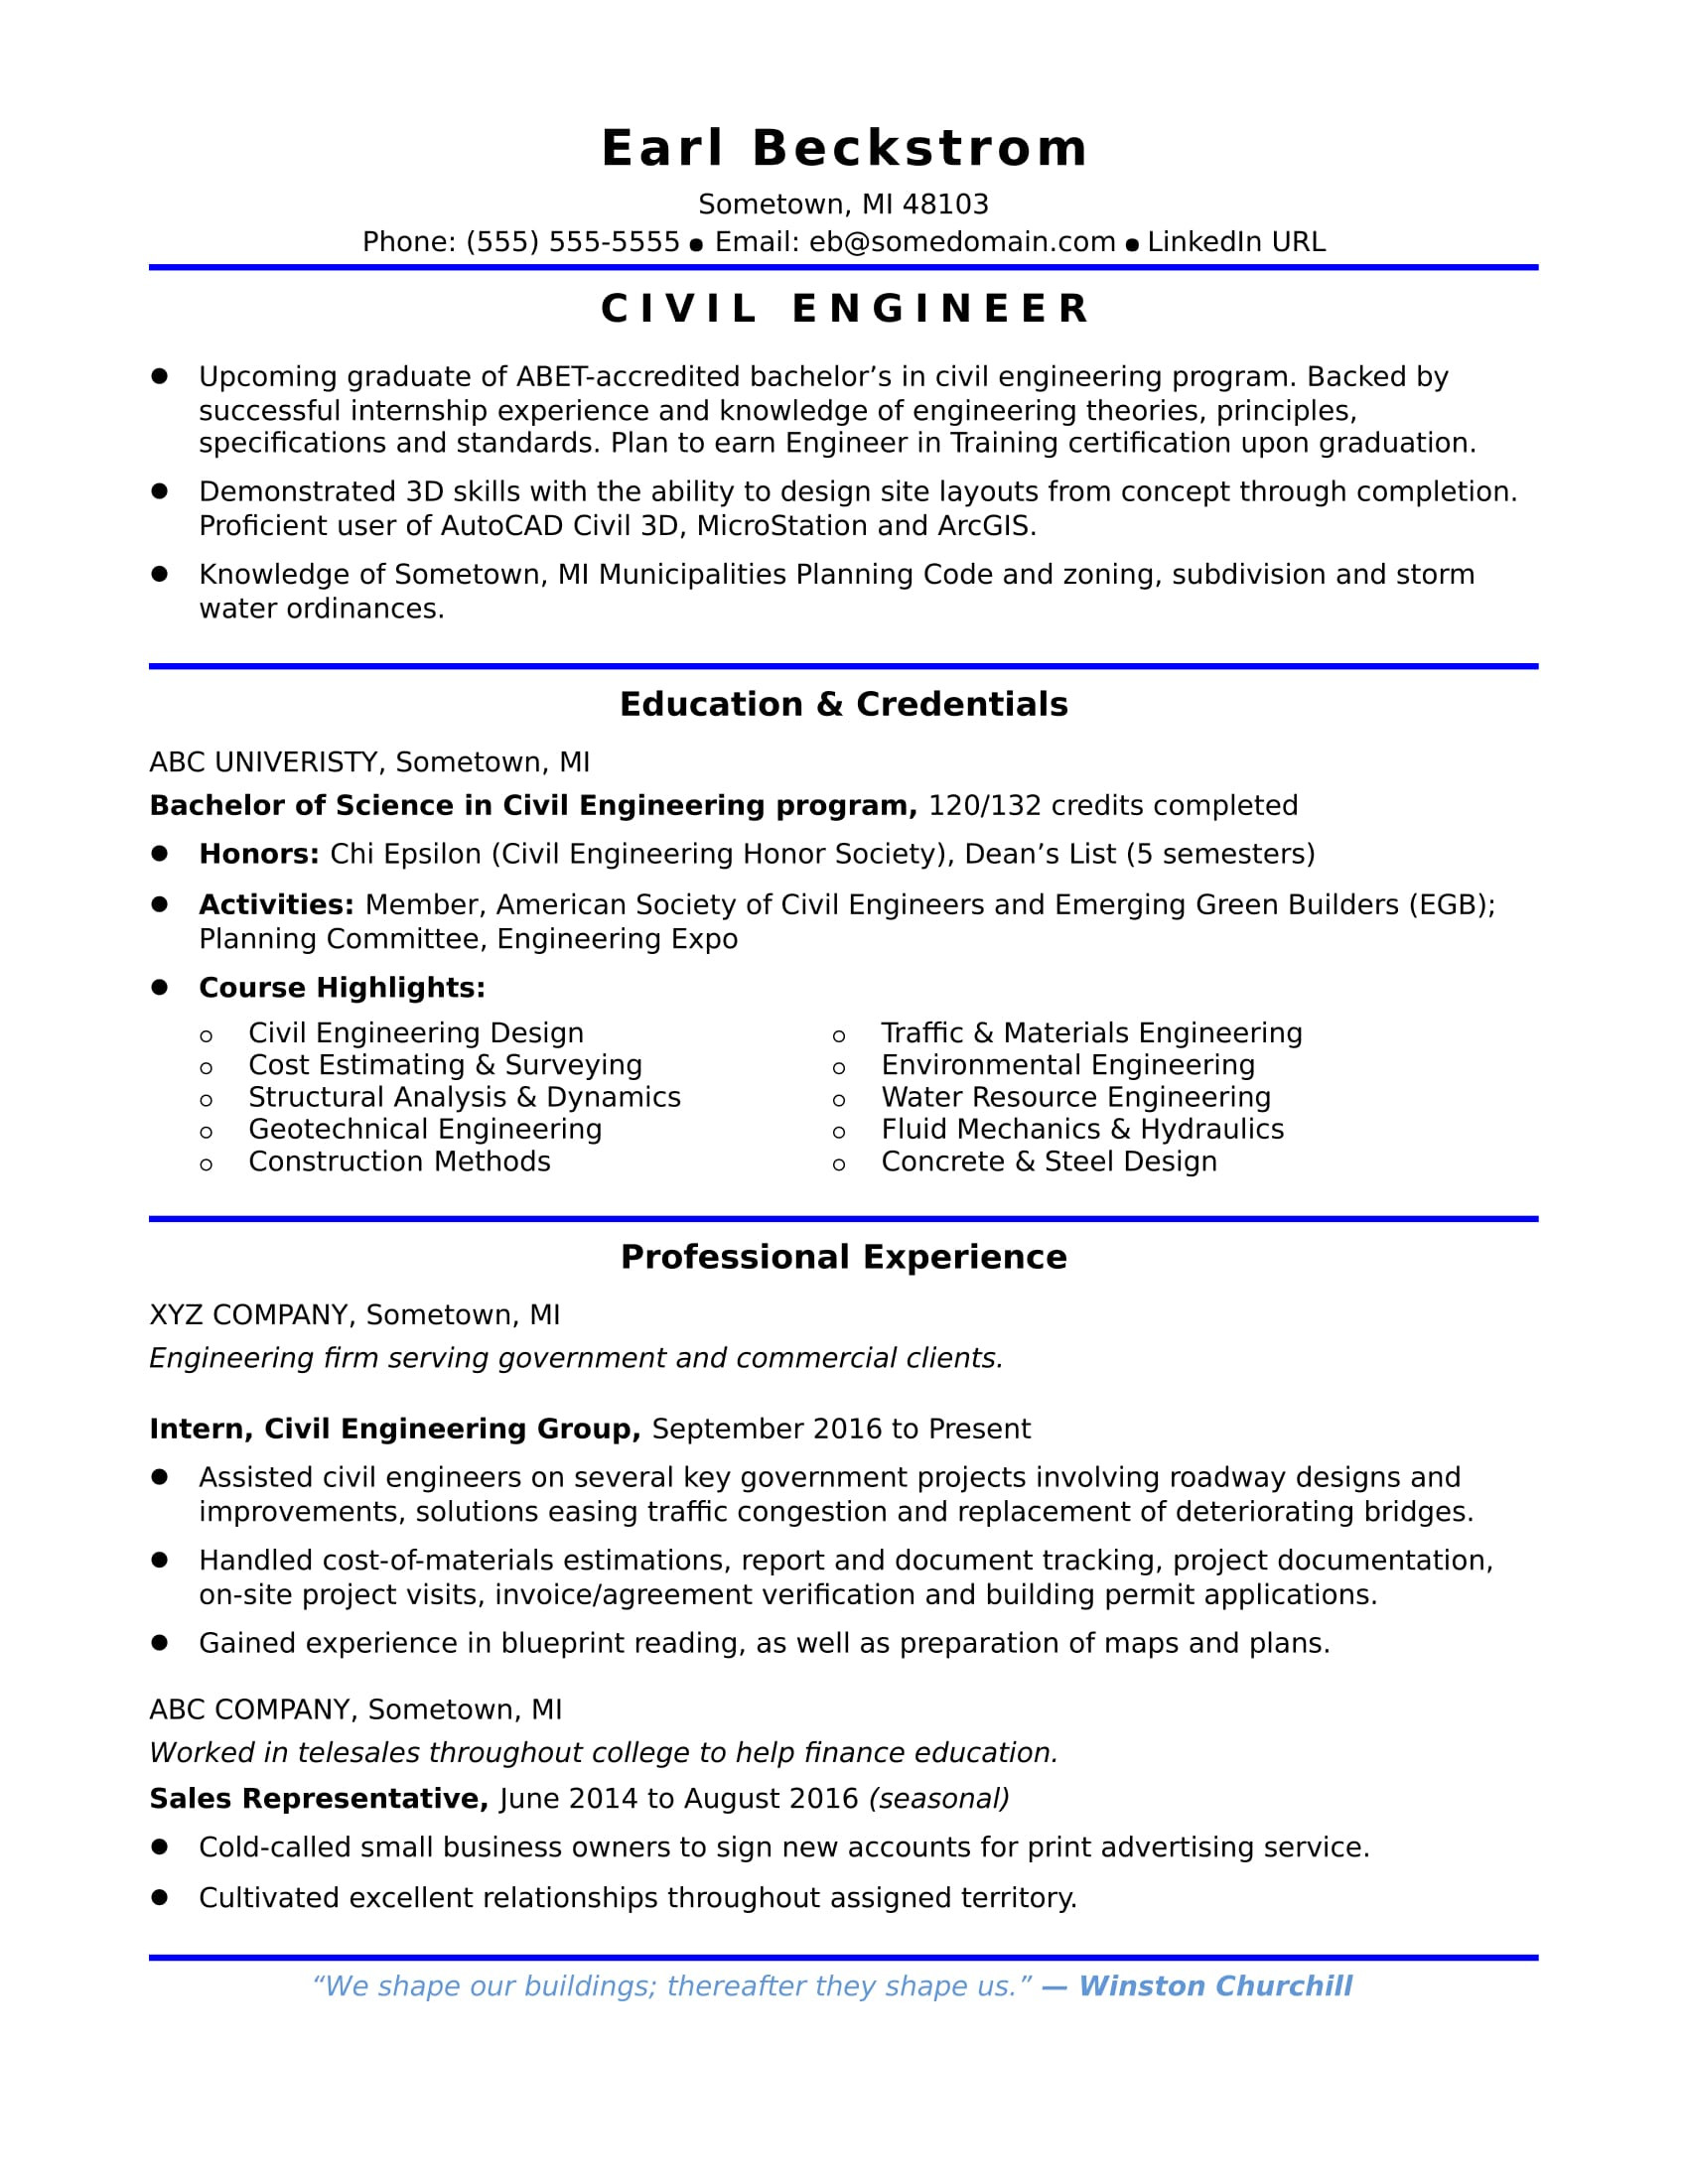 Resume Samples for Experienced Engineering Professionals Entry-level Civil Engineering Resume Monster.com